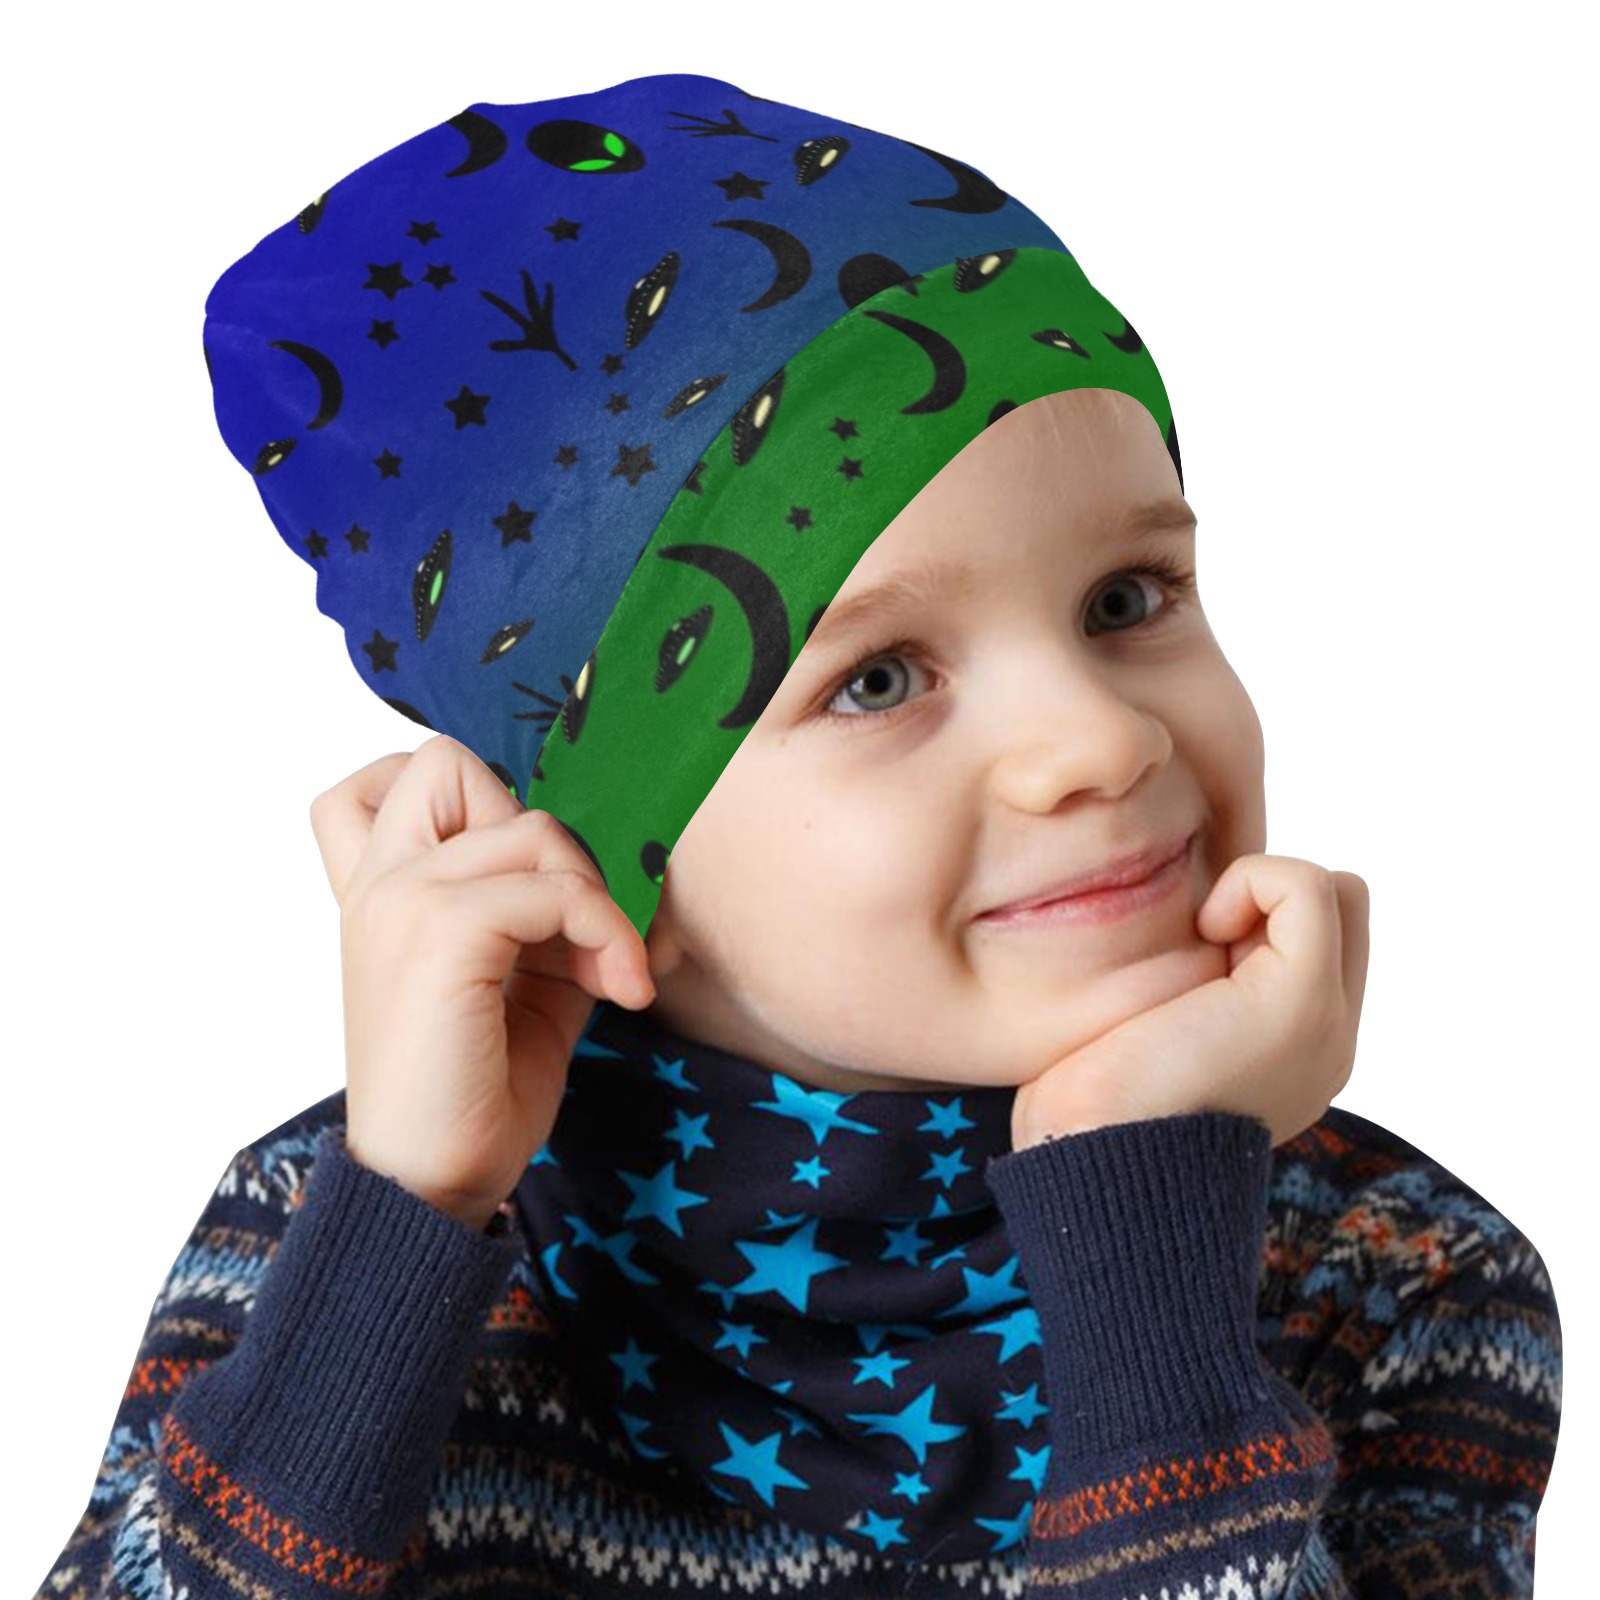 Aliens and Spaceships - Blue / Green All Over Print Beanie for Kids